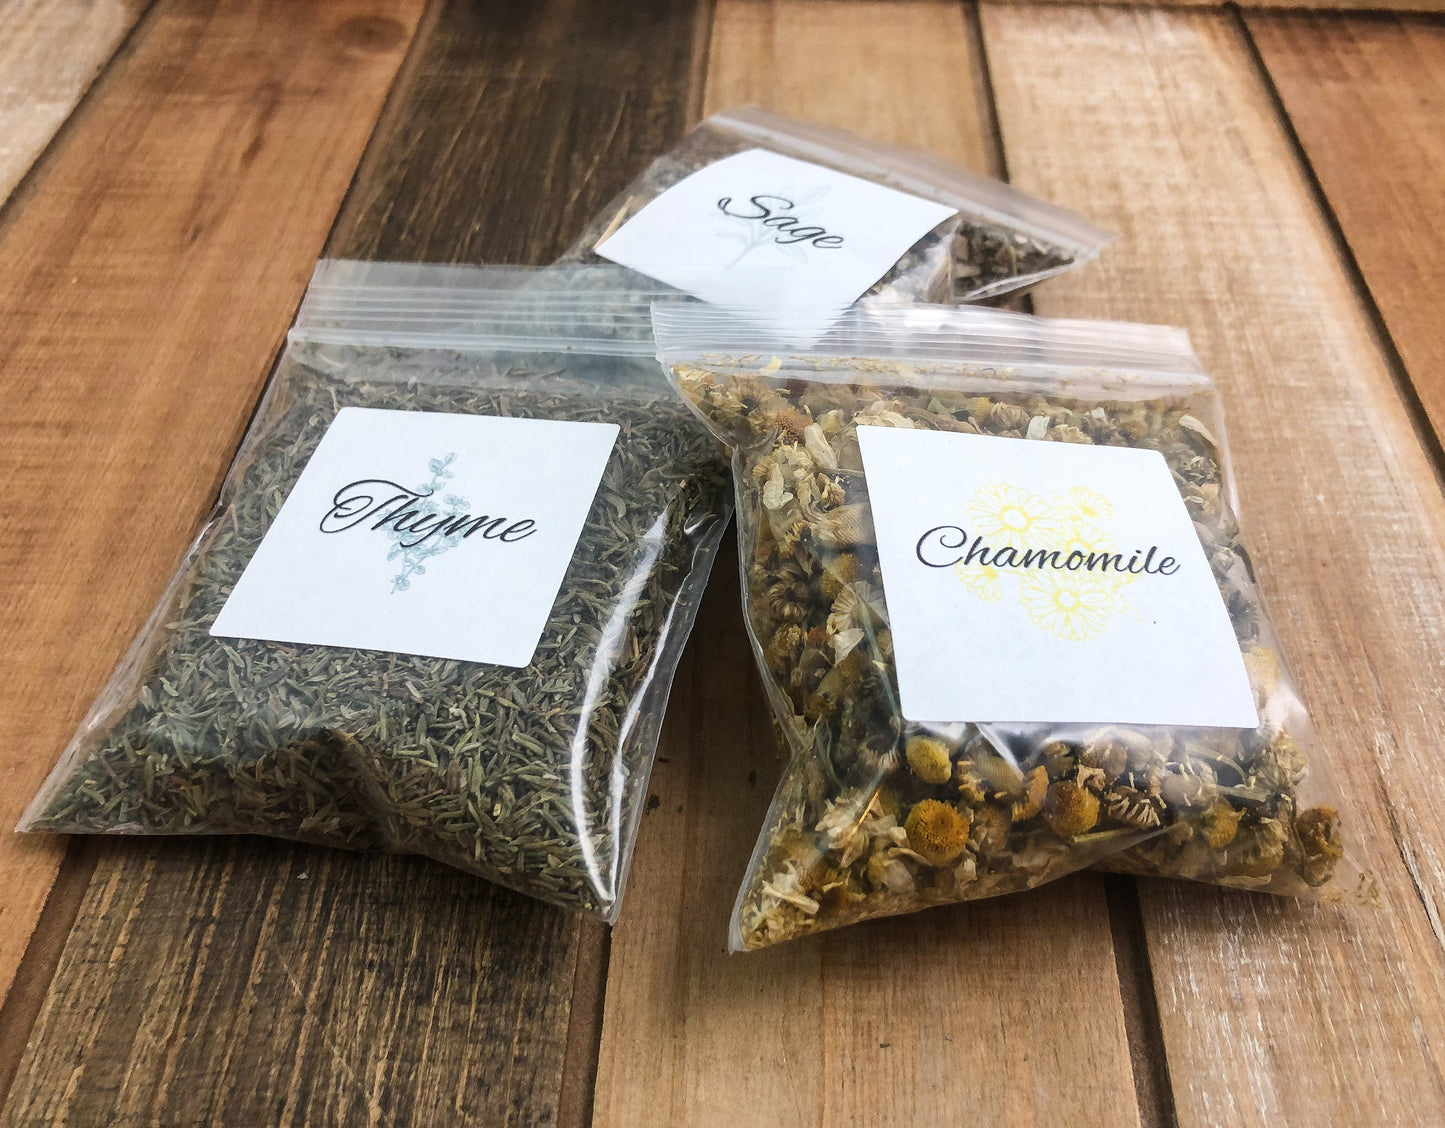 8g clear plastic bags of dried thyme, sage, and chamomile on a wooden background